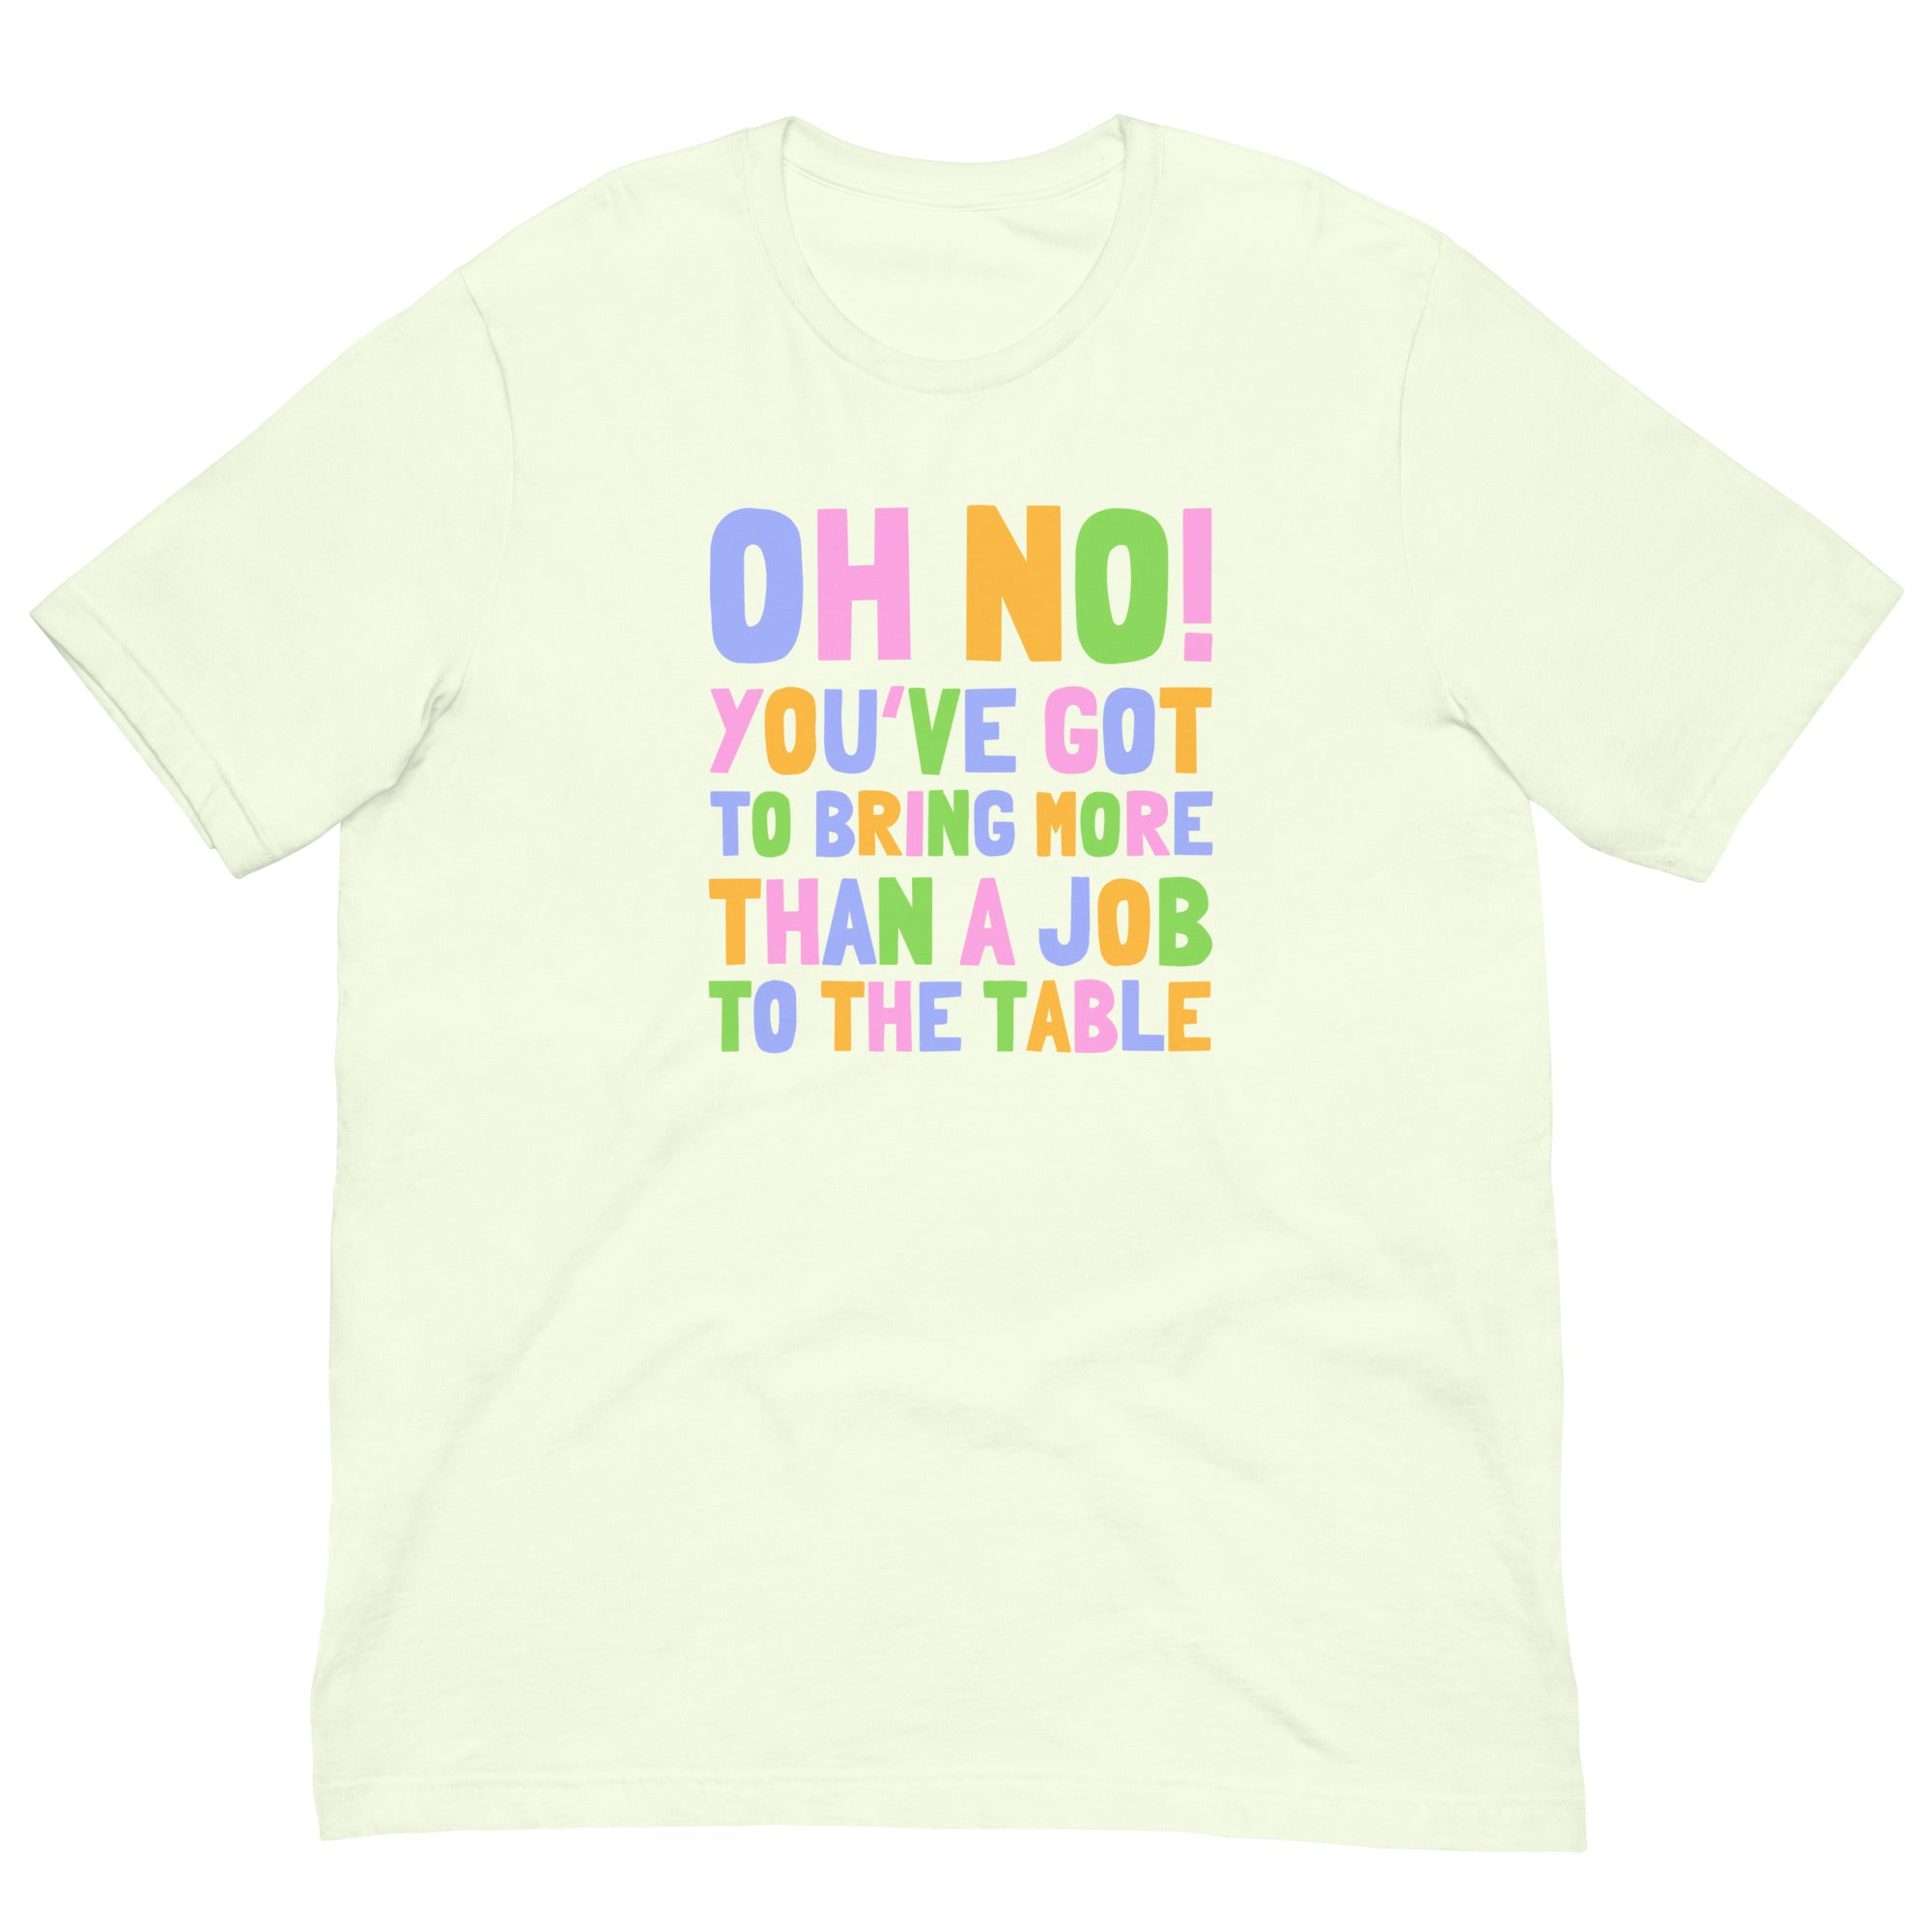 Oh No! You’ve Got To Bring More Than A Job To The Table Unisex Feminist T-shirt - Shop Women’s Rights T-shirts - Feminist Trash Store- Citron